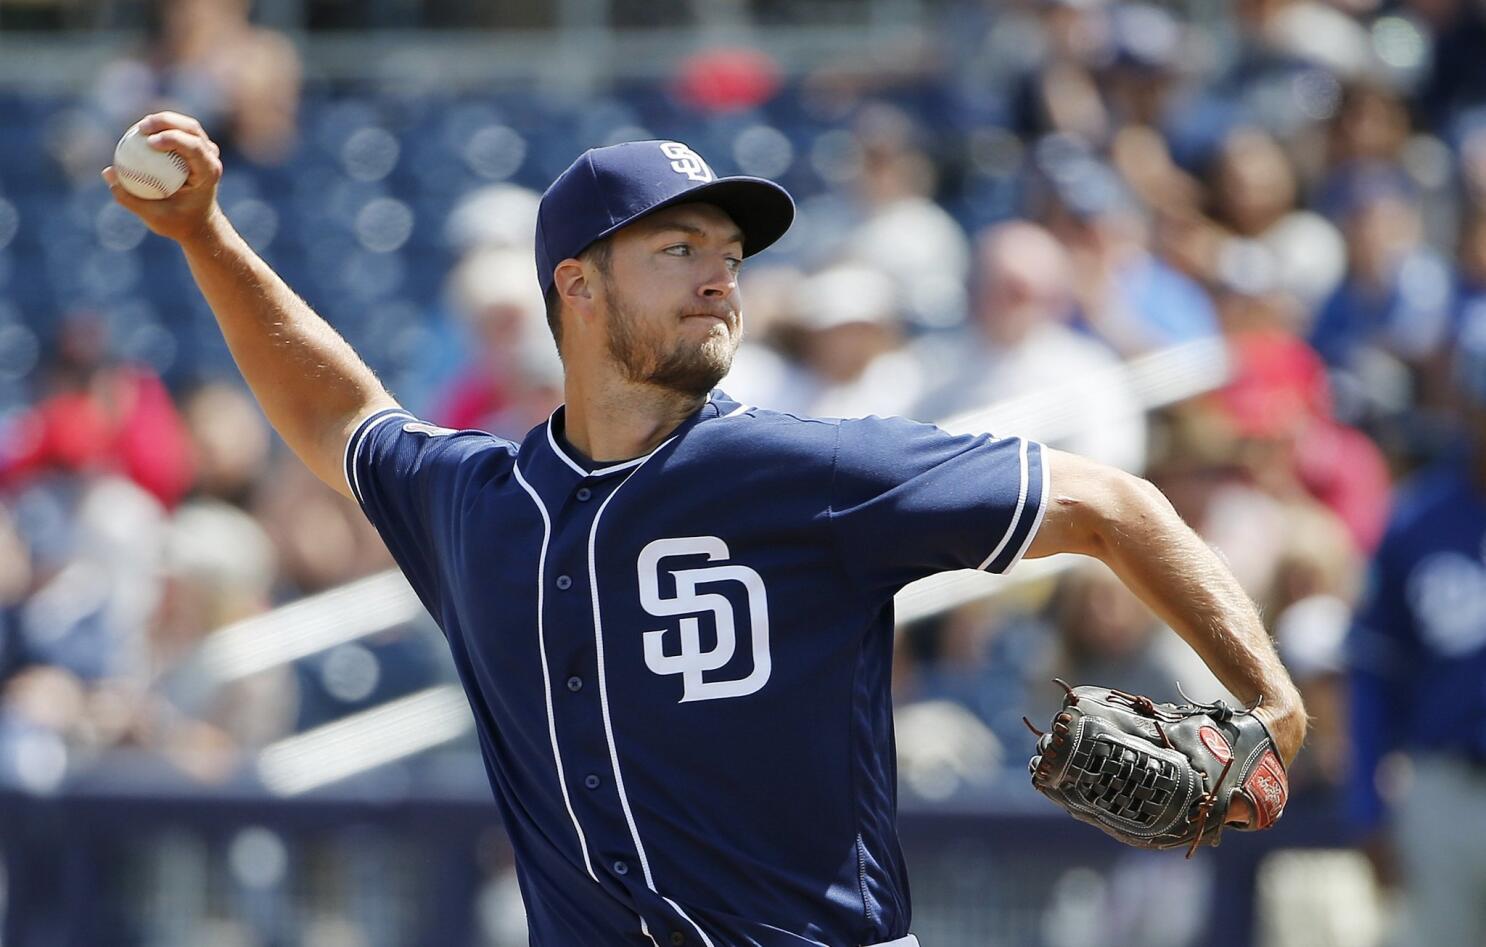 Padres News: Your 2016 San Diego Padres 25-Man Roster